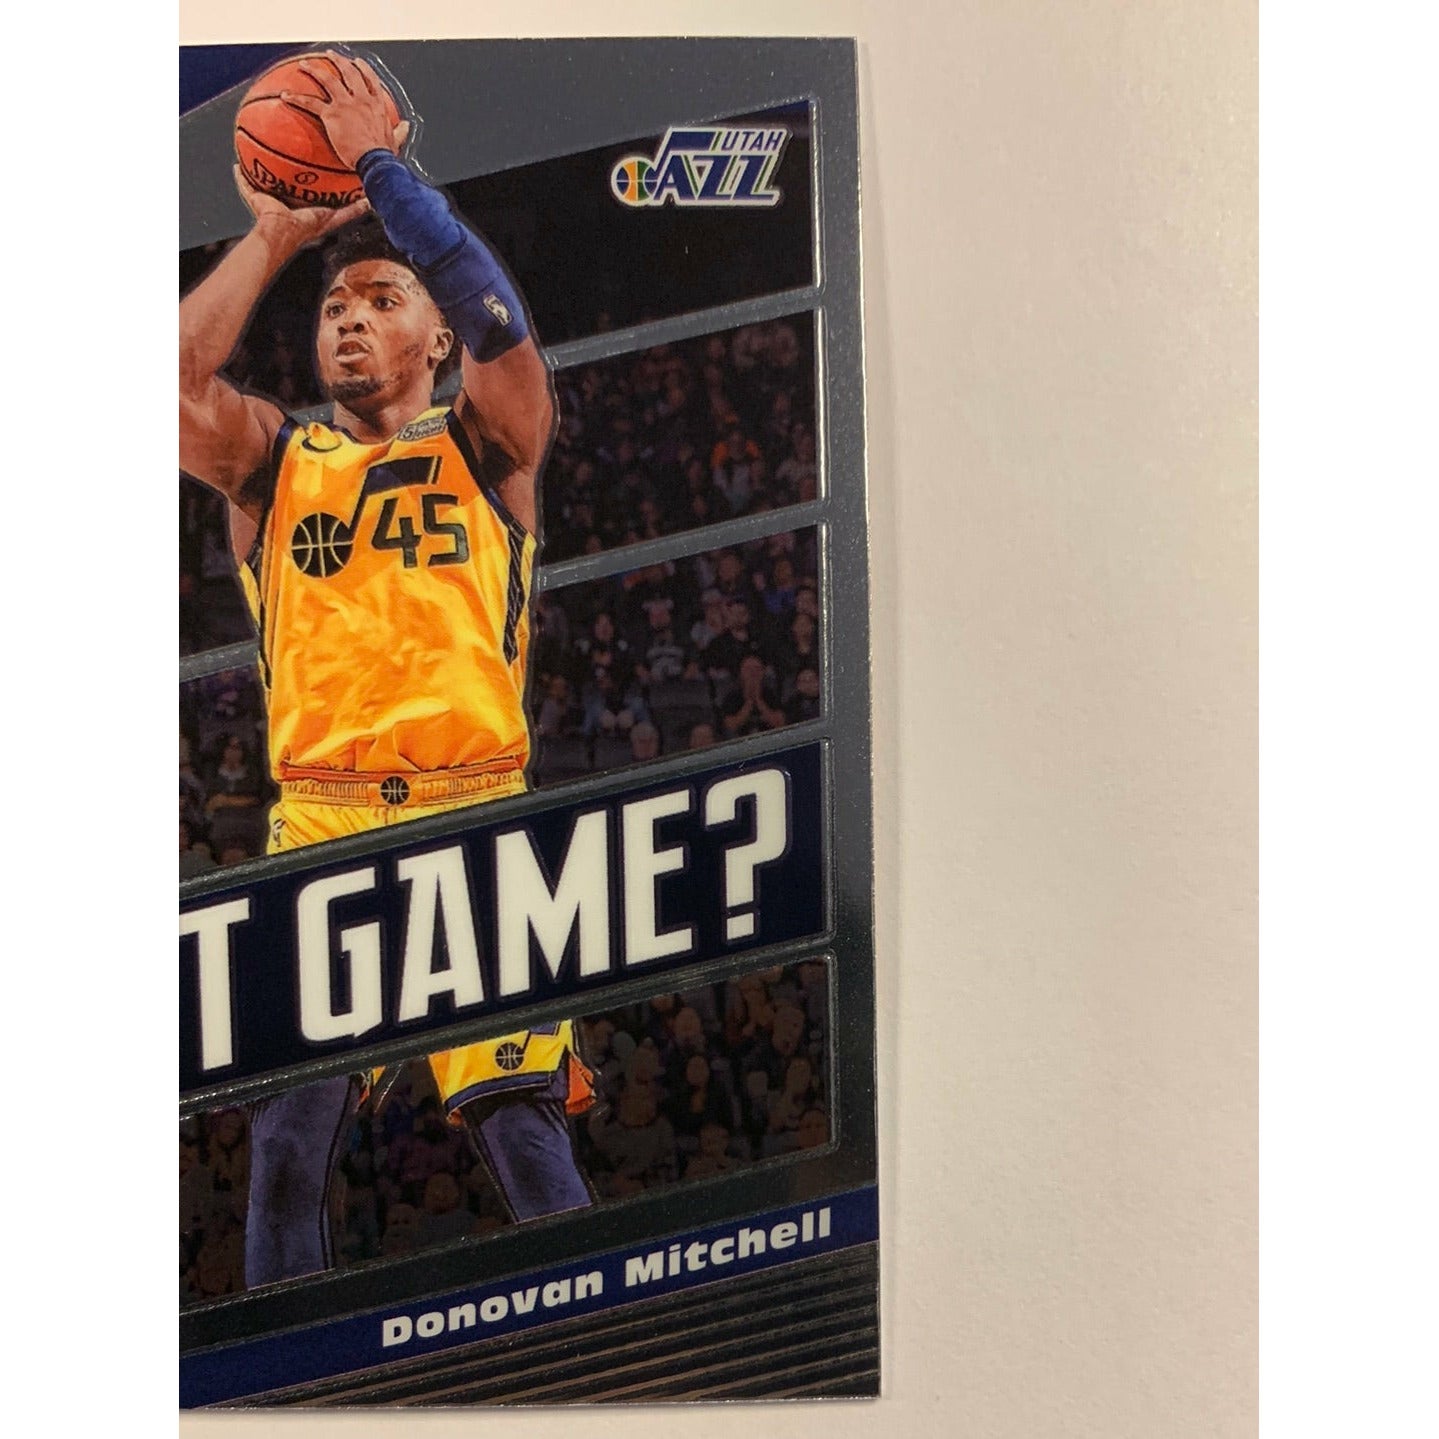  2019-20 Mosaic Donovan Mitchell Got Game?  Local Legends Cards & Collectibles